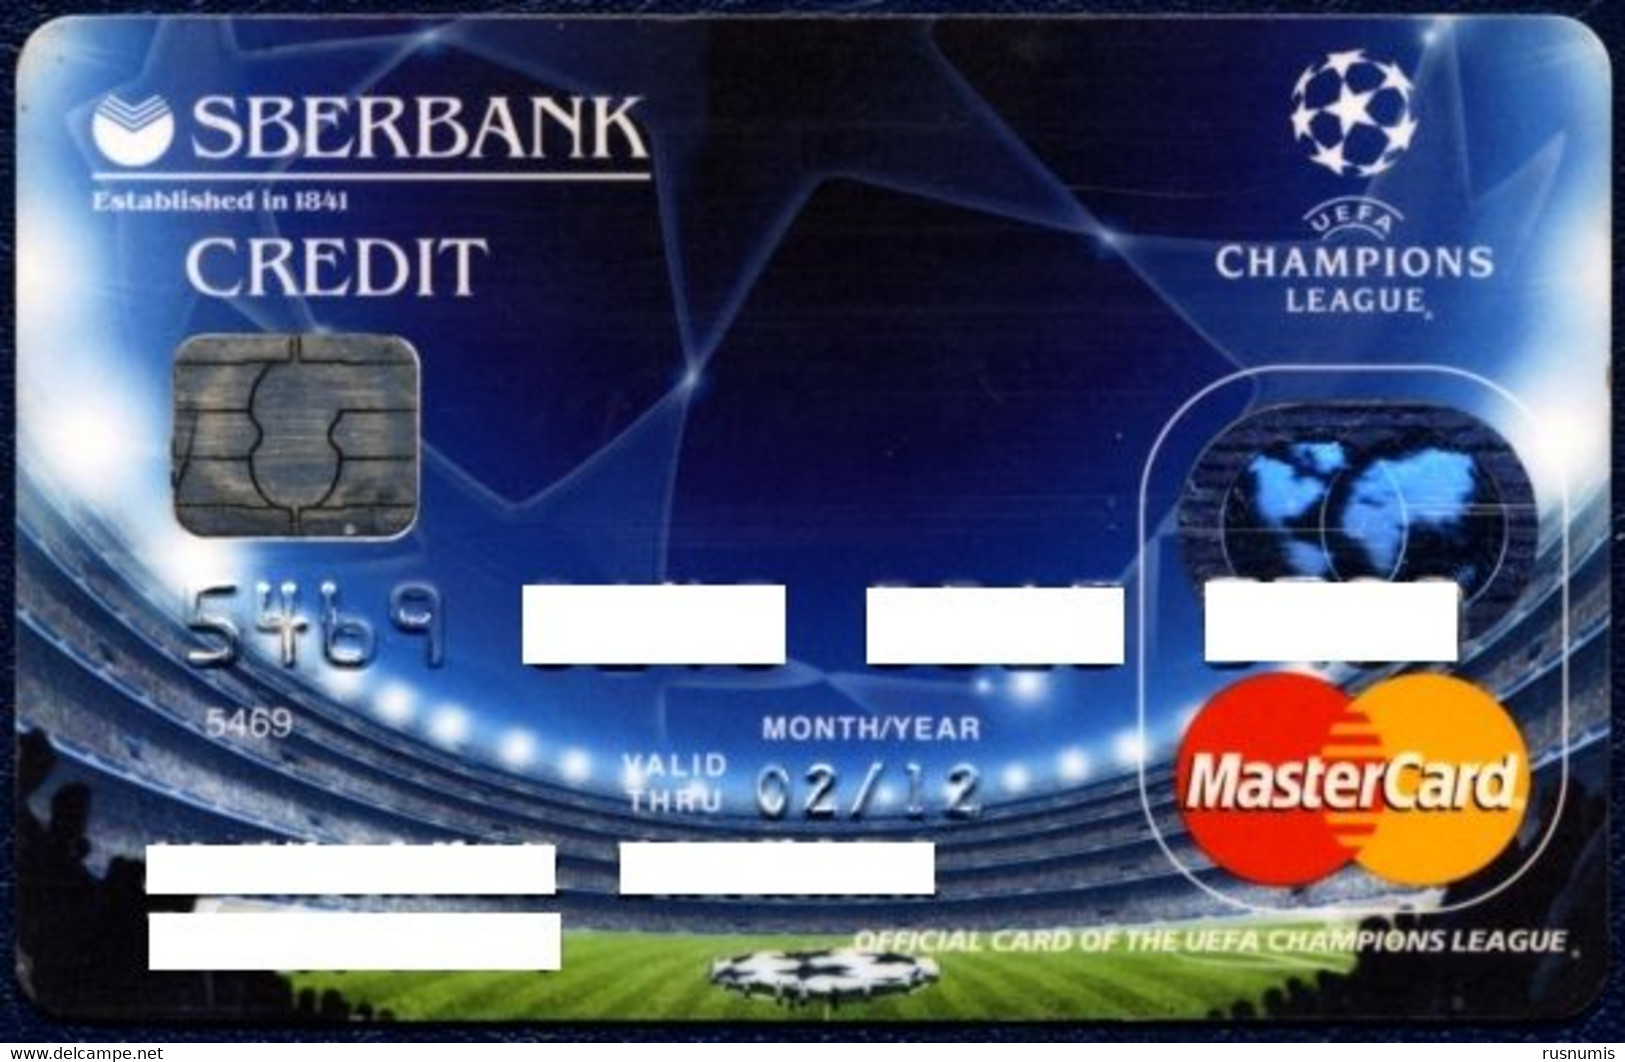 SBERBANK SAVINGS BANK RUSSIA MASTERCARD CARD UEFA CHAMPIONS LEAGUE SOCCER EXP. FEBRUARY 2012 - Credit Cards (Exp. Date Min. 10 Years)